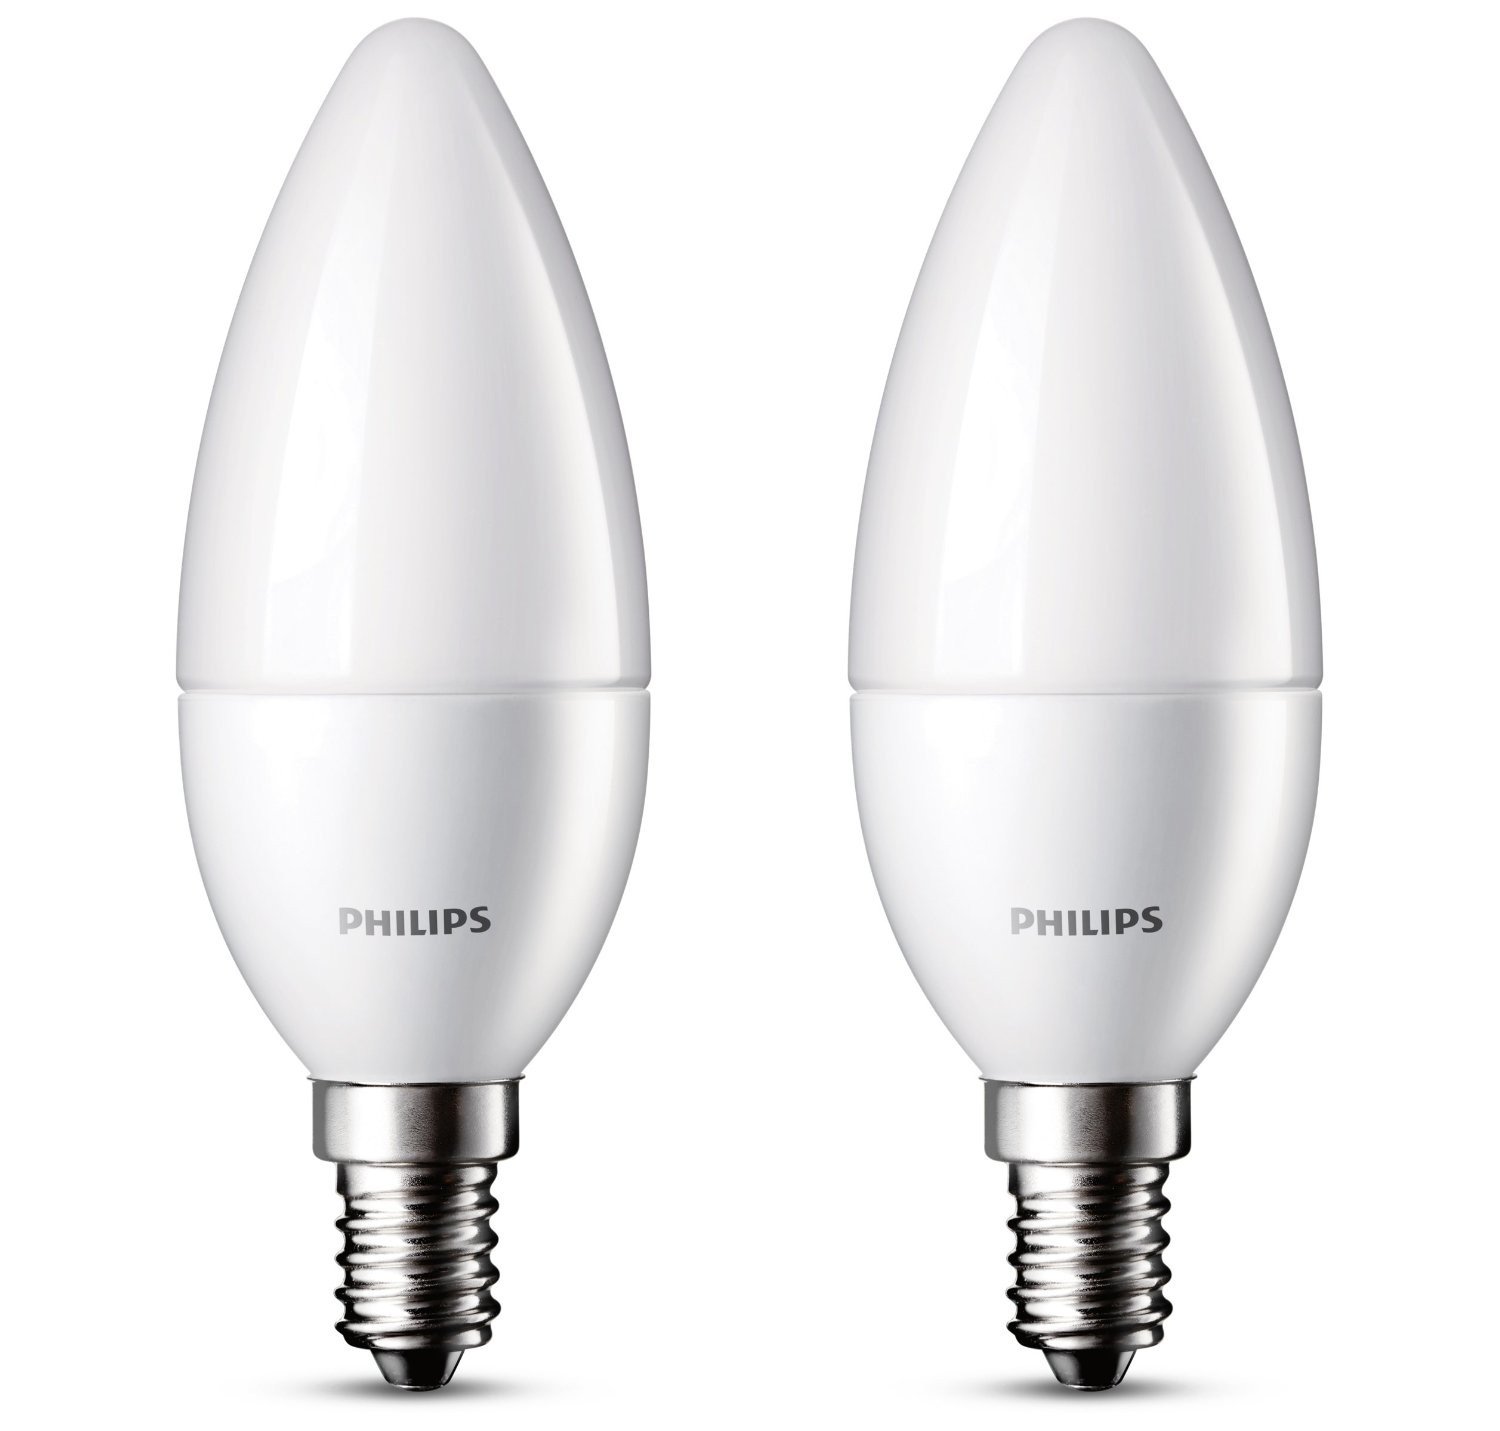 How Bright Is 4W LED Bulb